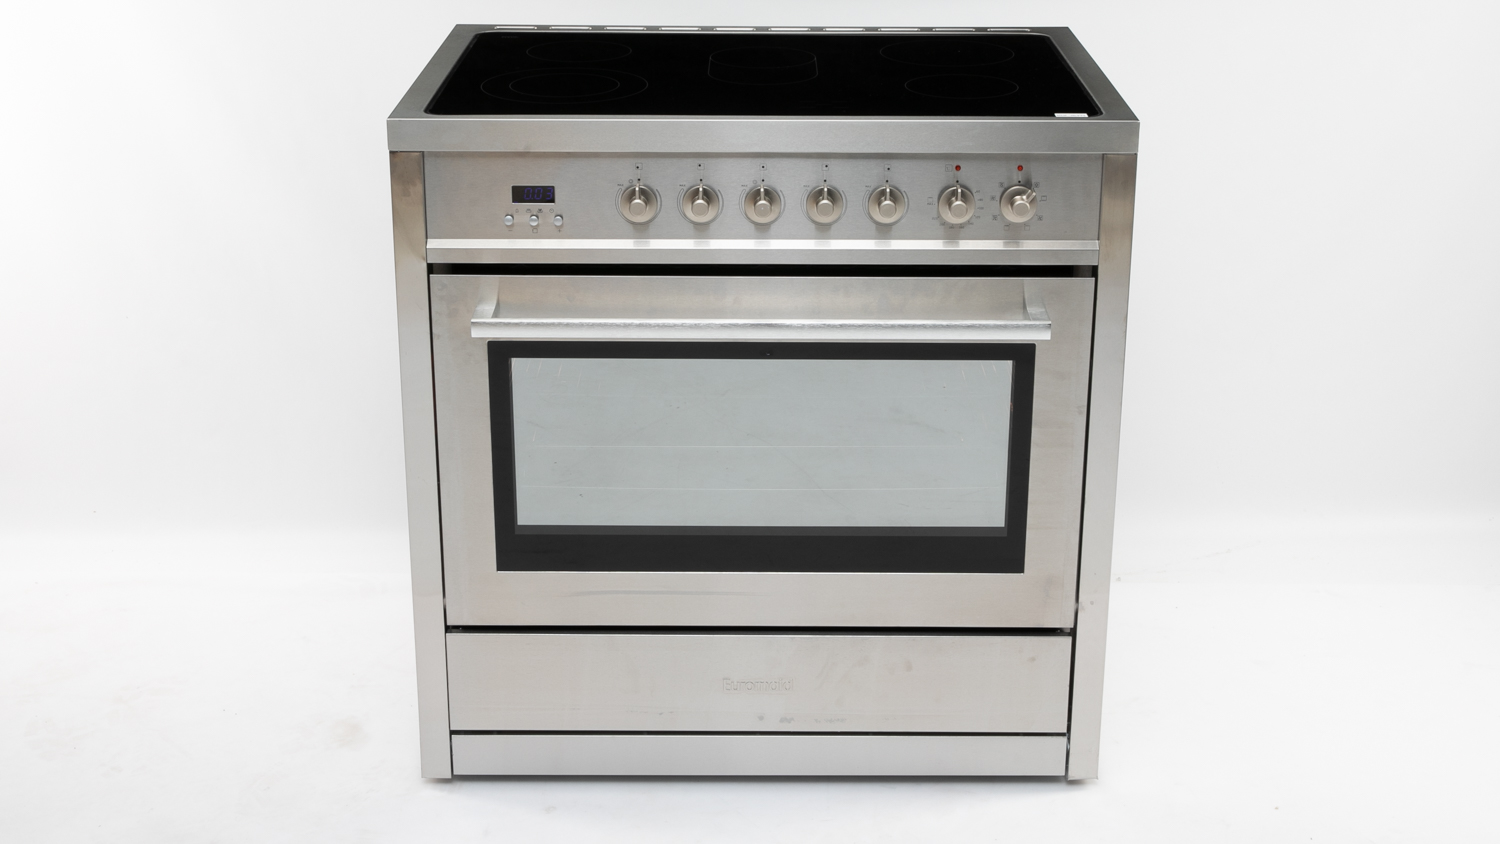 Euromaid 90cm Professional Series Freestanding Cooker FC9PS carousel image